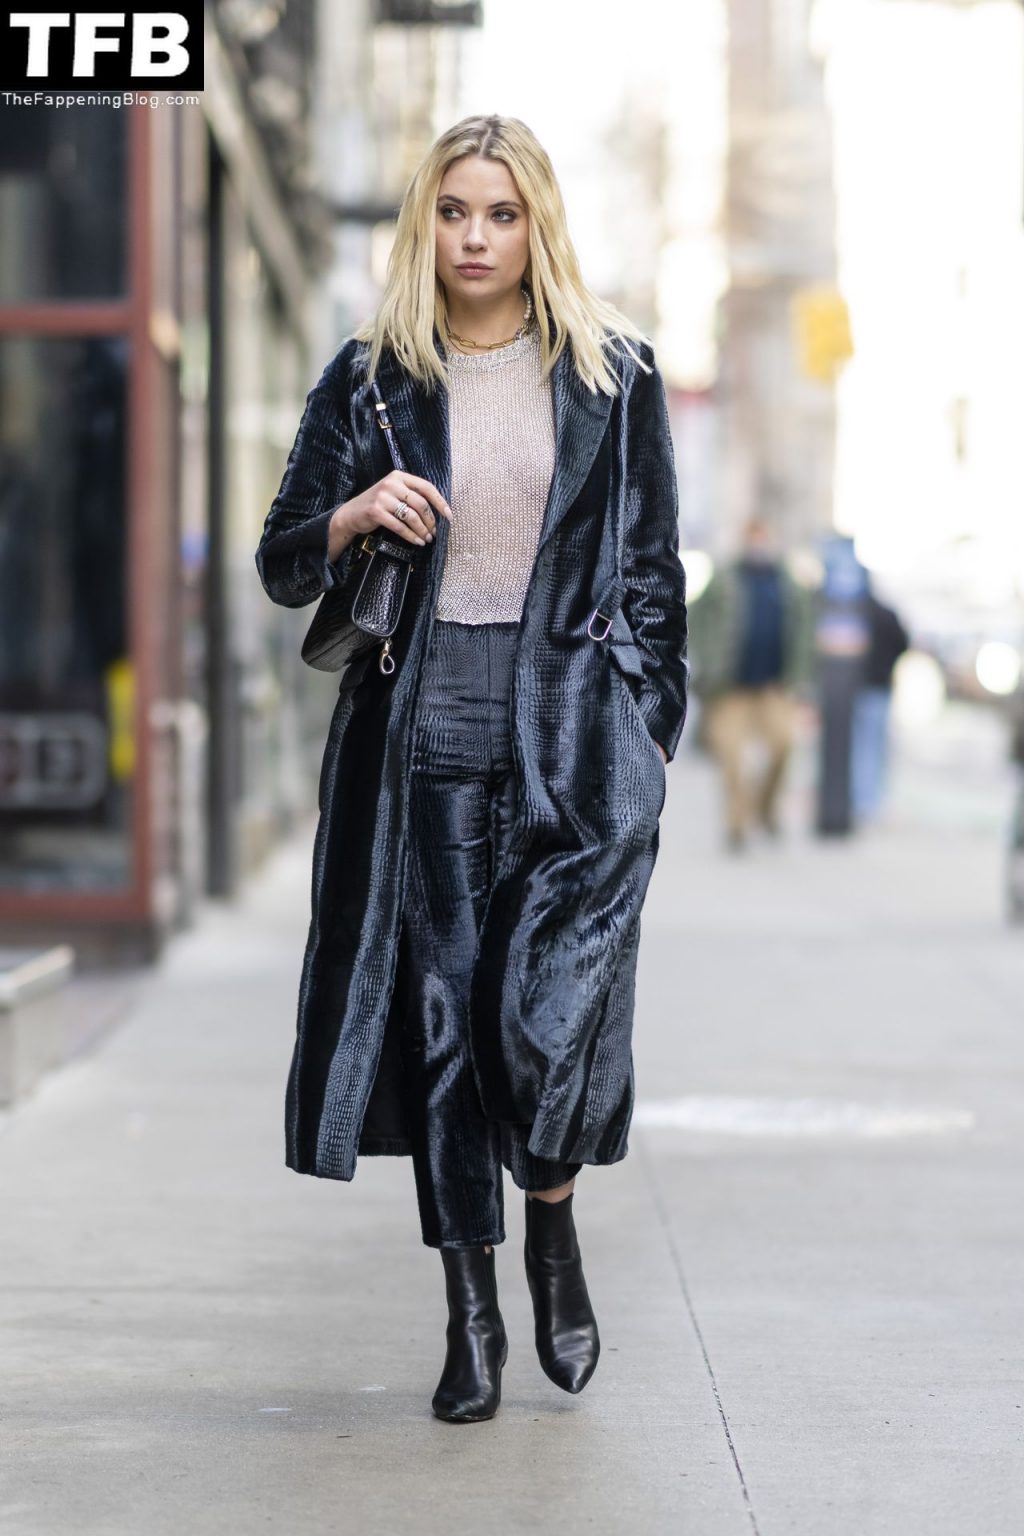 Ashley Benson Sexy The Fappening Blog 10 1024x1536 - Braless Ashley Benson Looks Stylish While Heading to a Meeting in NYC (20 Photos)